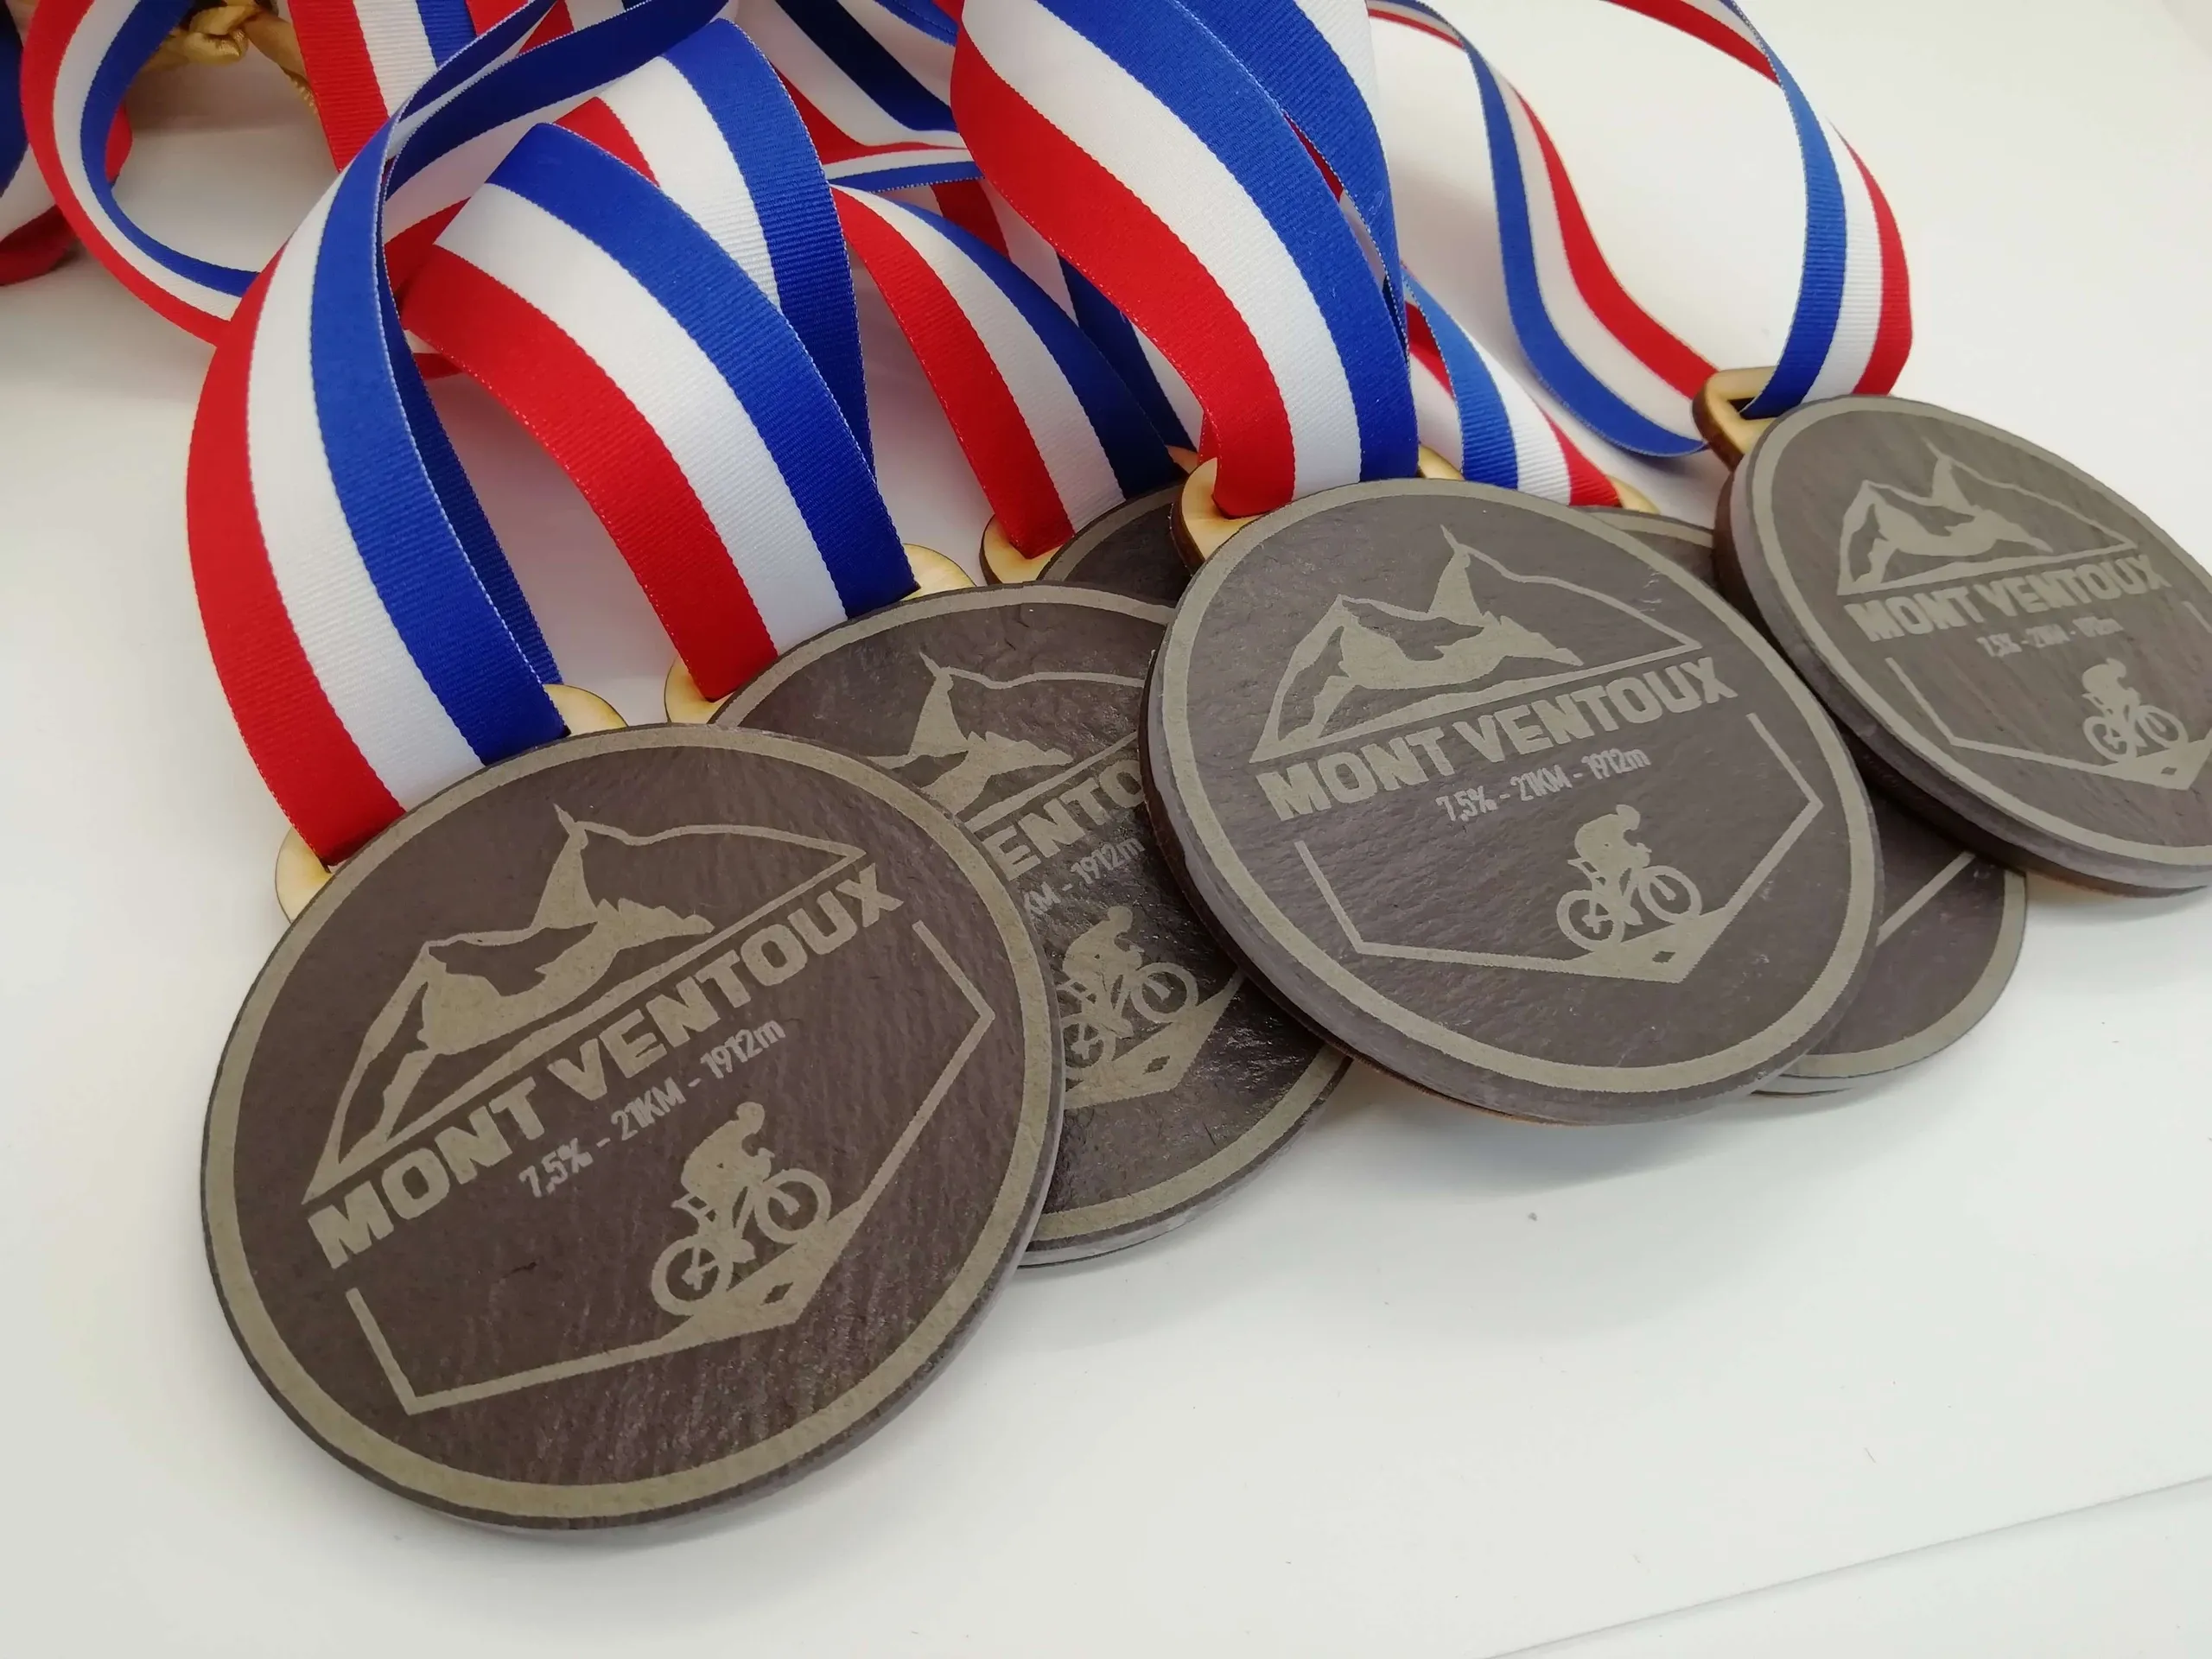 A group of eco-friendly medals with red, white and blue ribbons.